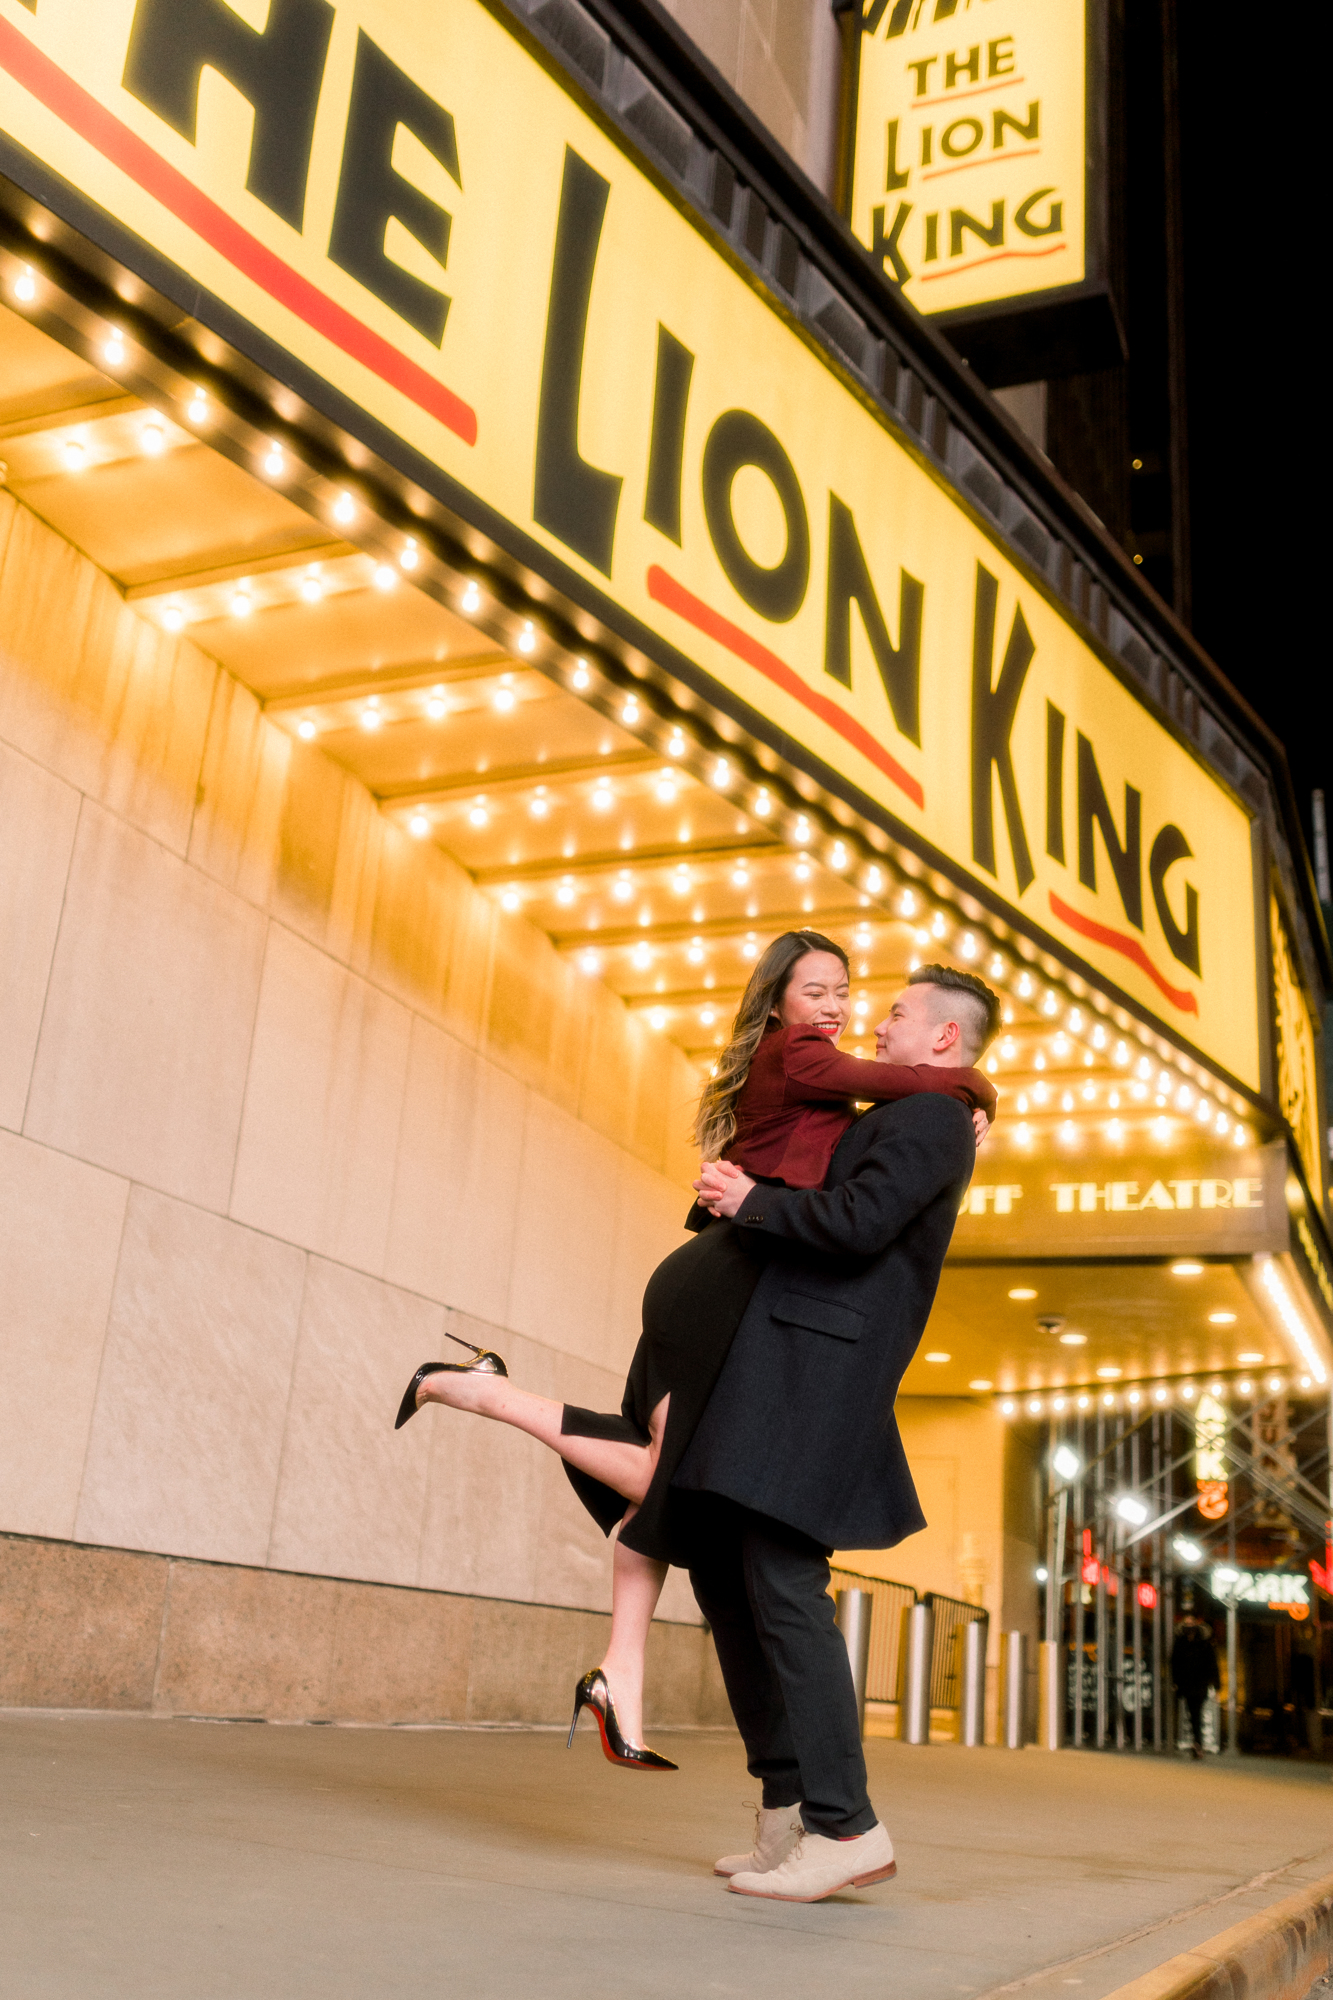 Classic Nighttime Winter Engagement Photos in New York's Iconic Times Square